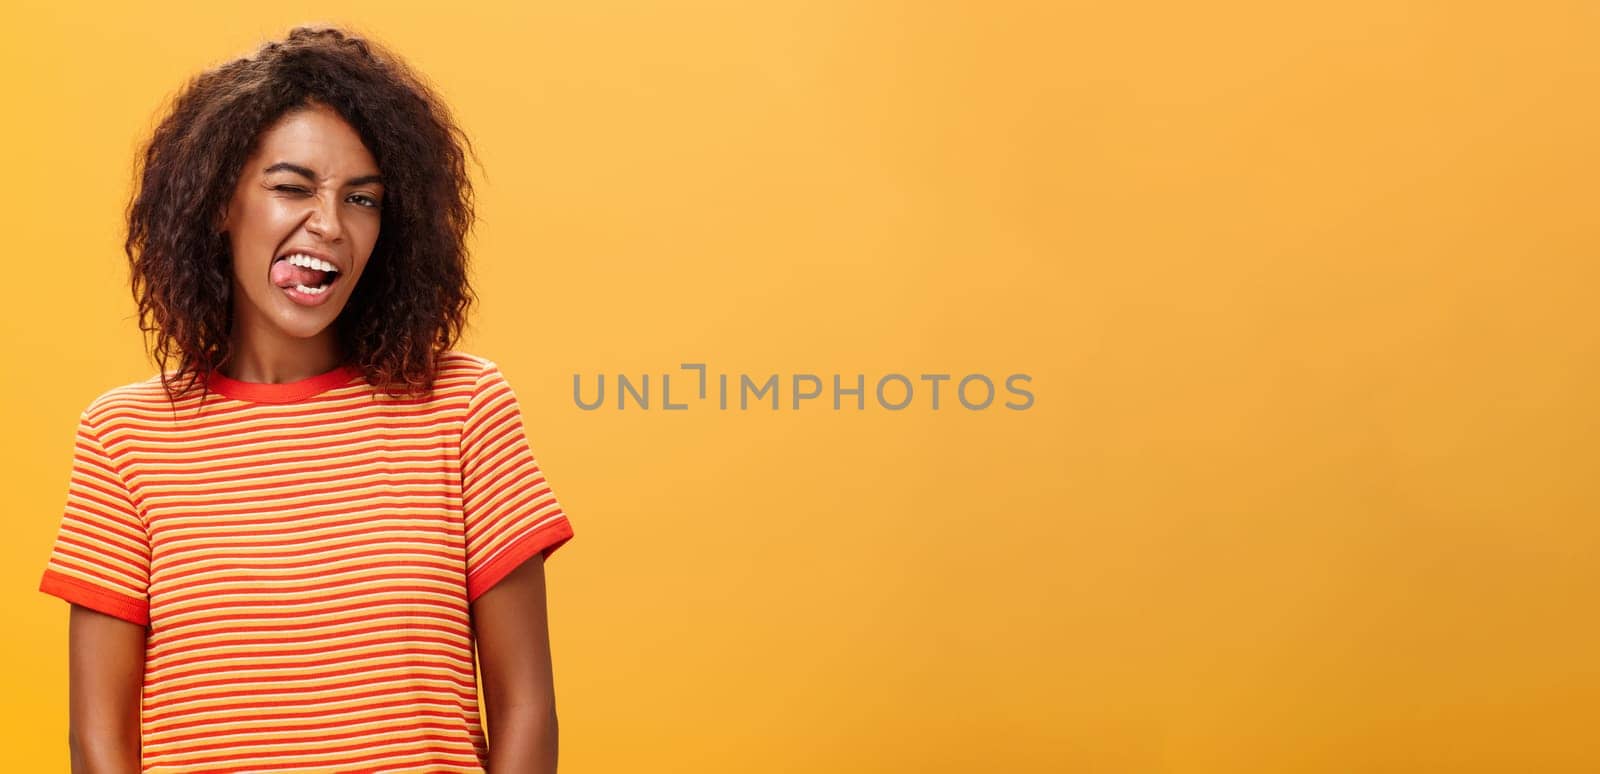 Portrait of daring and emotive confident flirty woman with afro hairstyle winking joyfully showing tongue posing carefree and enthusiastic against orange background flirting with hot guy. Copy space